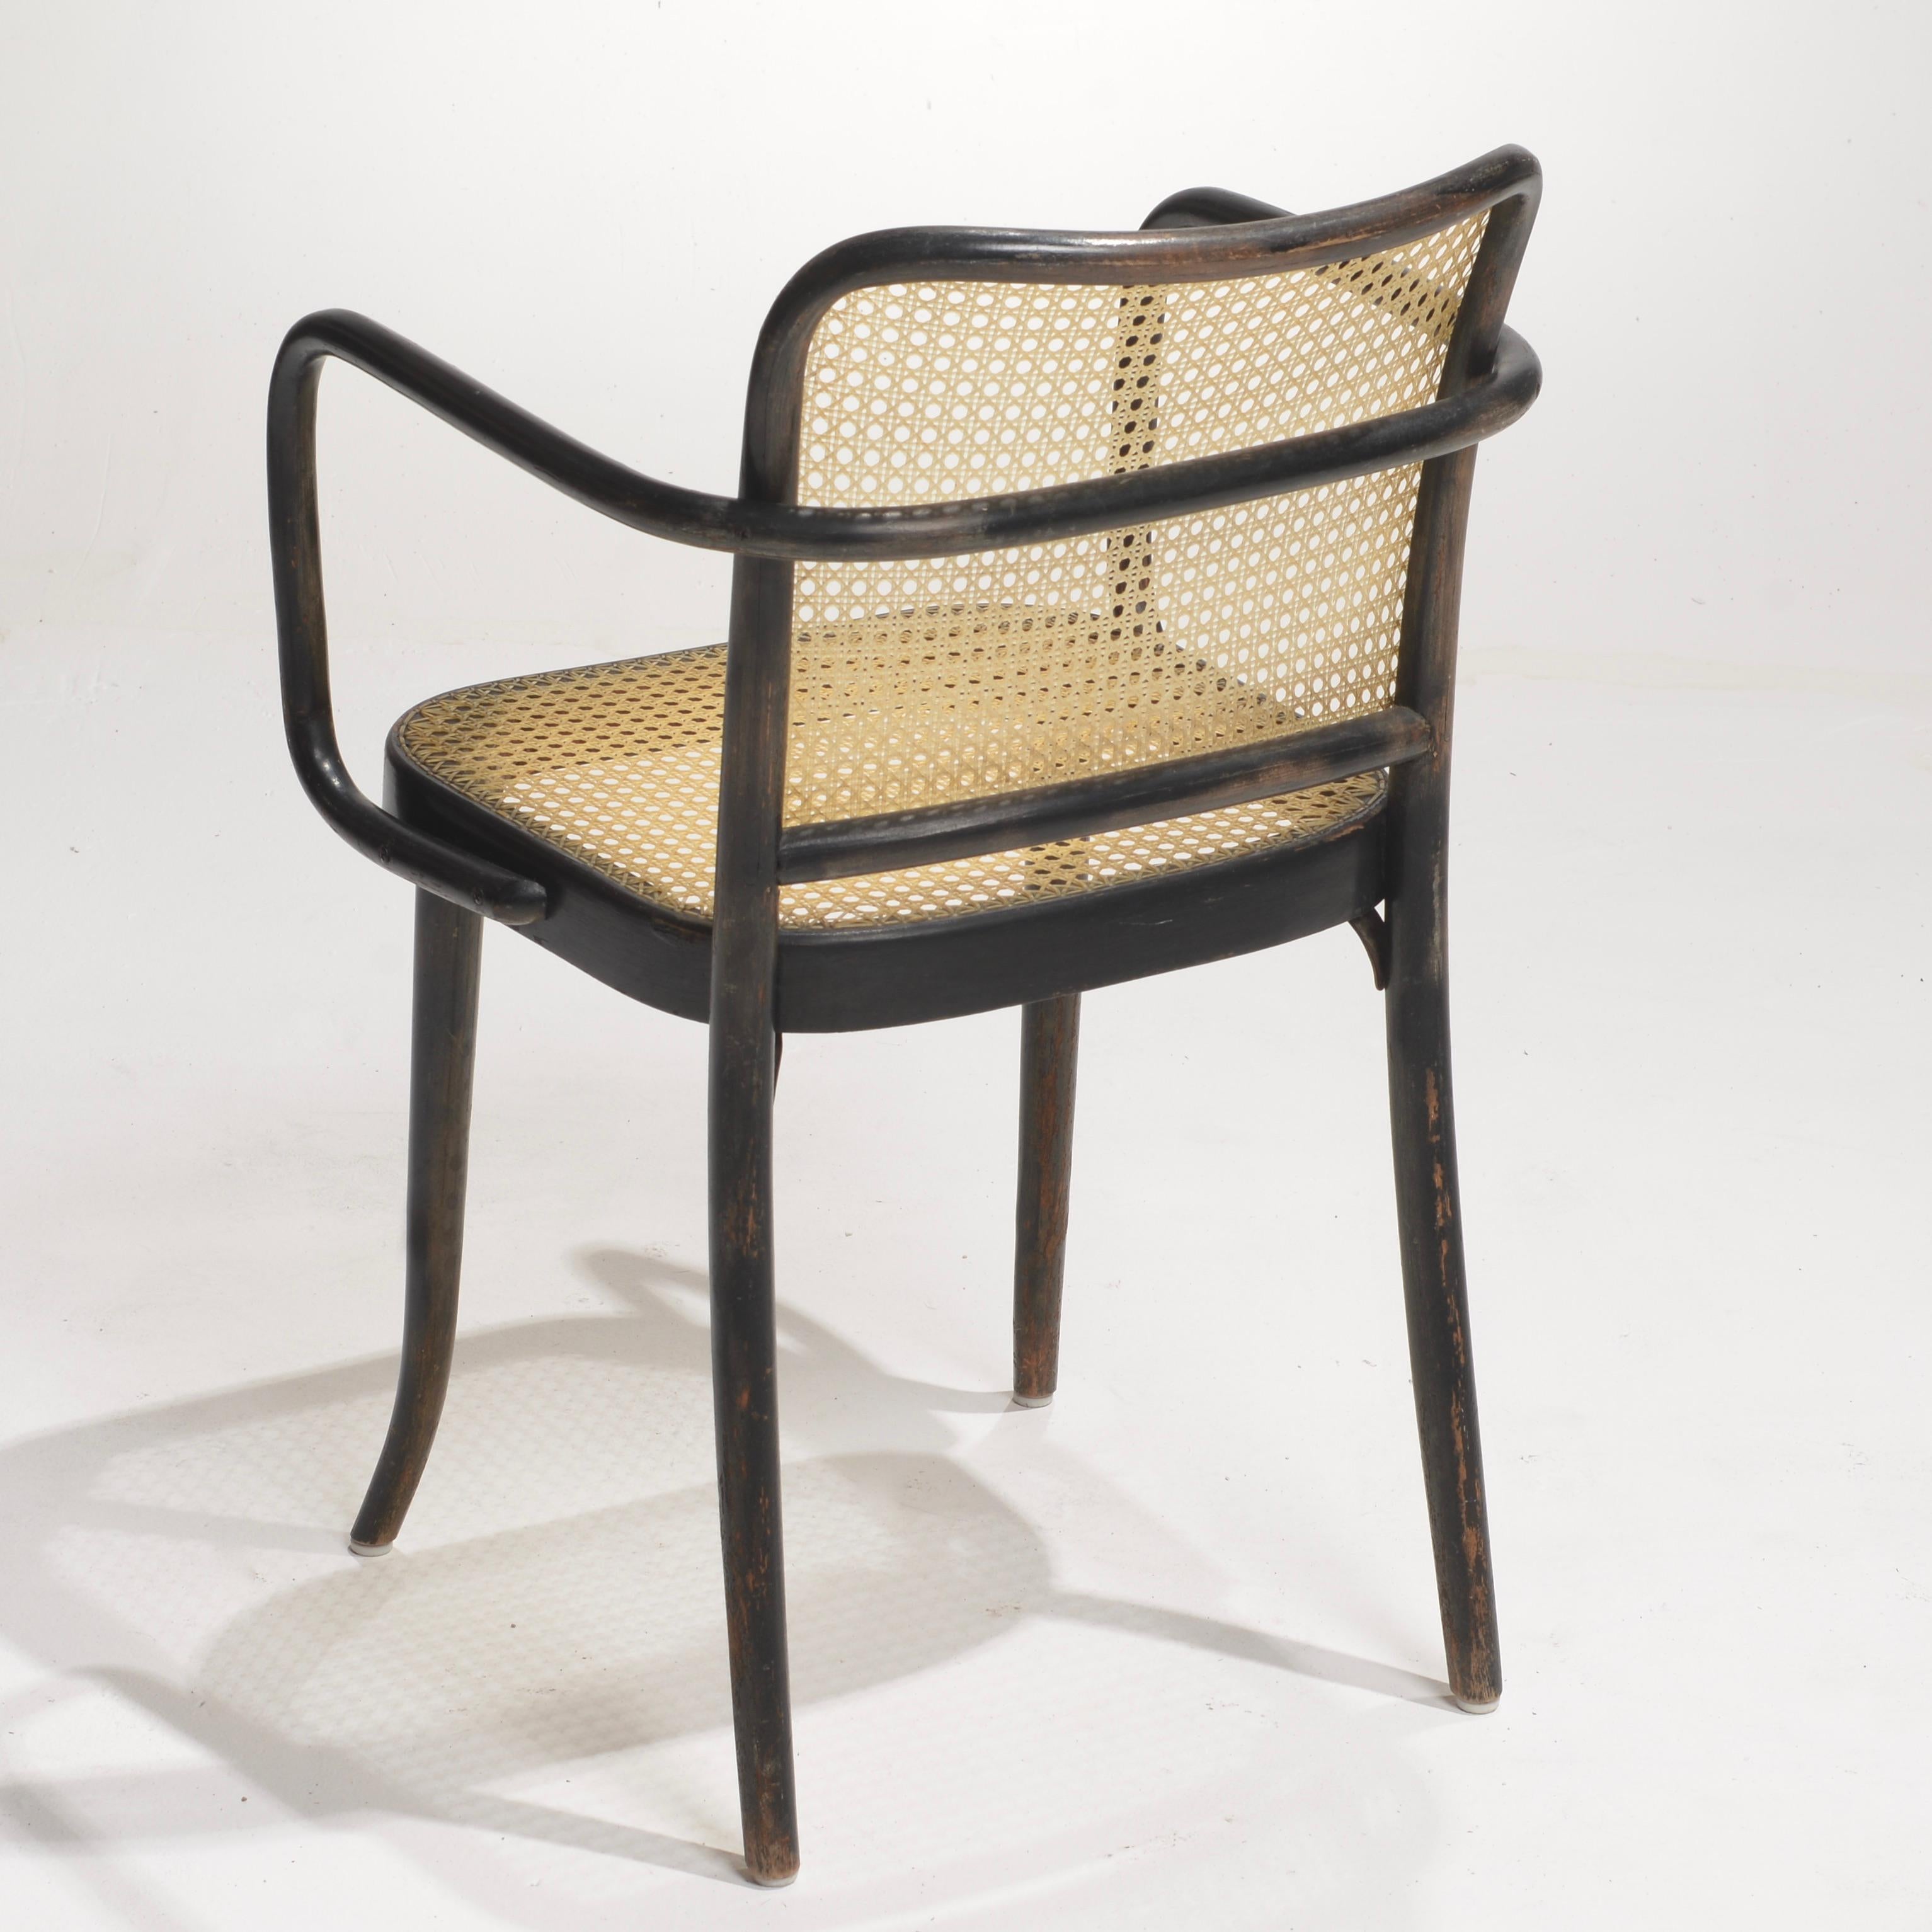 Josef Hoffmann Bentwood Beech Prague Model 811 Chairs in Black and Leather Weave In Good Condition For Sale In Los Angeles, CA